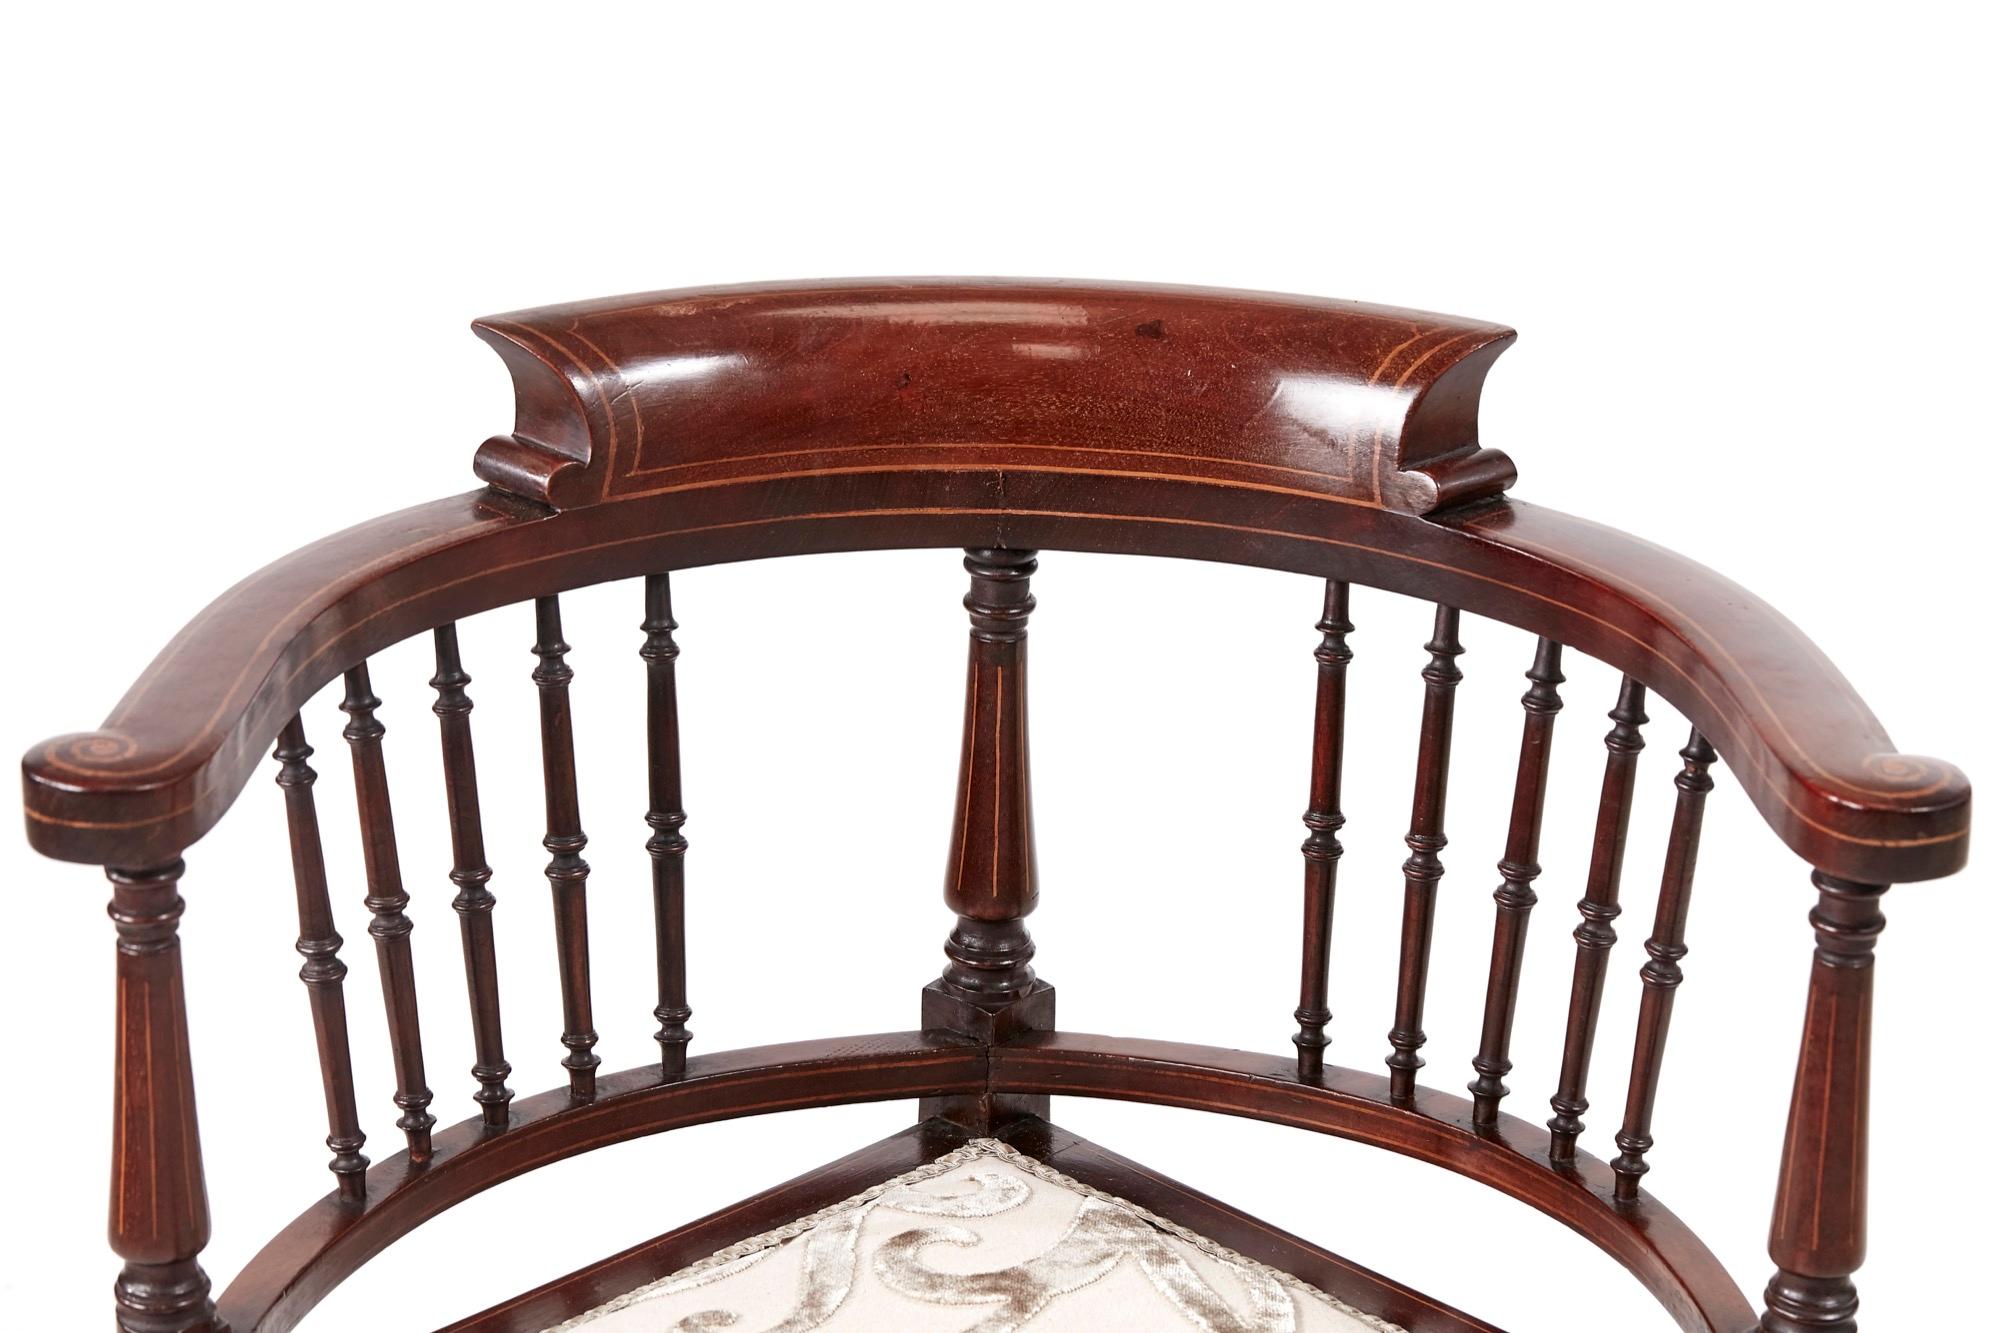 Quality Edwardian mahogany inlaid corner chair. This is a very attractive chair in perfect condition having a lovely quality shaped back with satinwood inlay, newly recovered seat, standing on turned tapering legs united by a turned cross